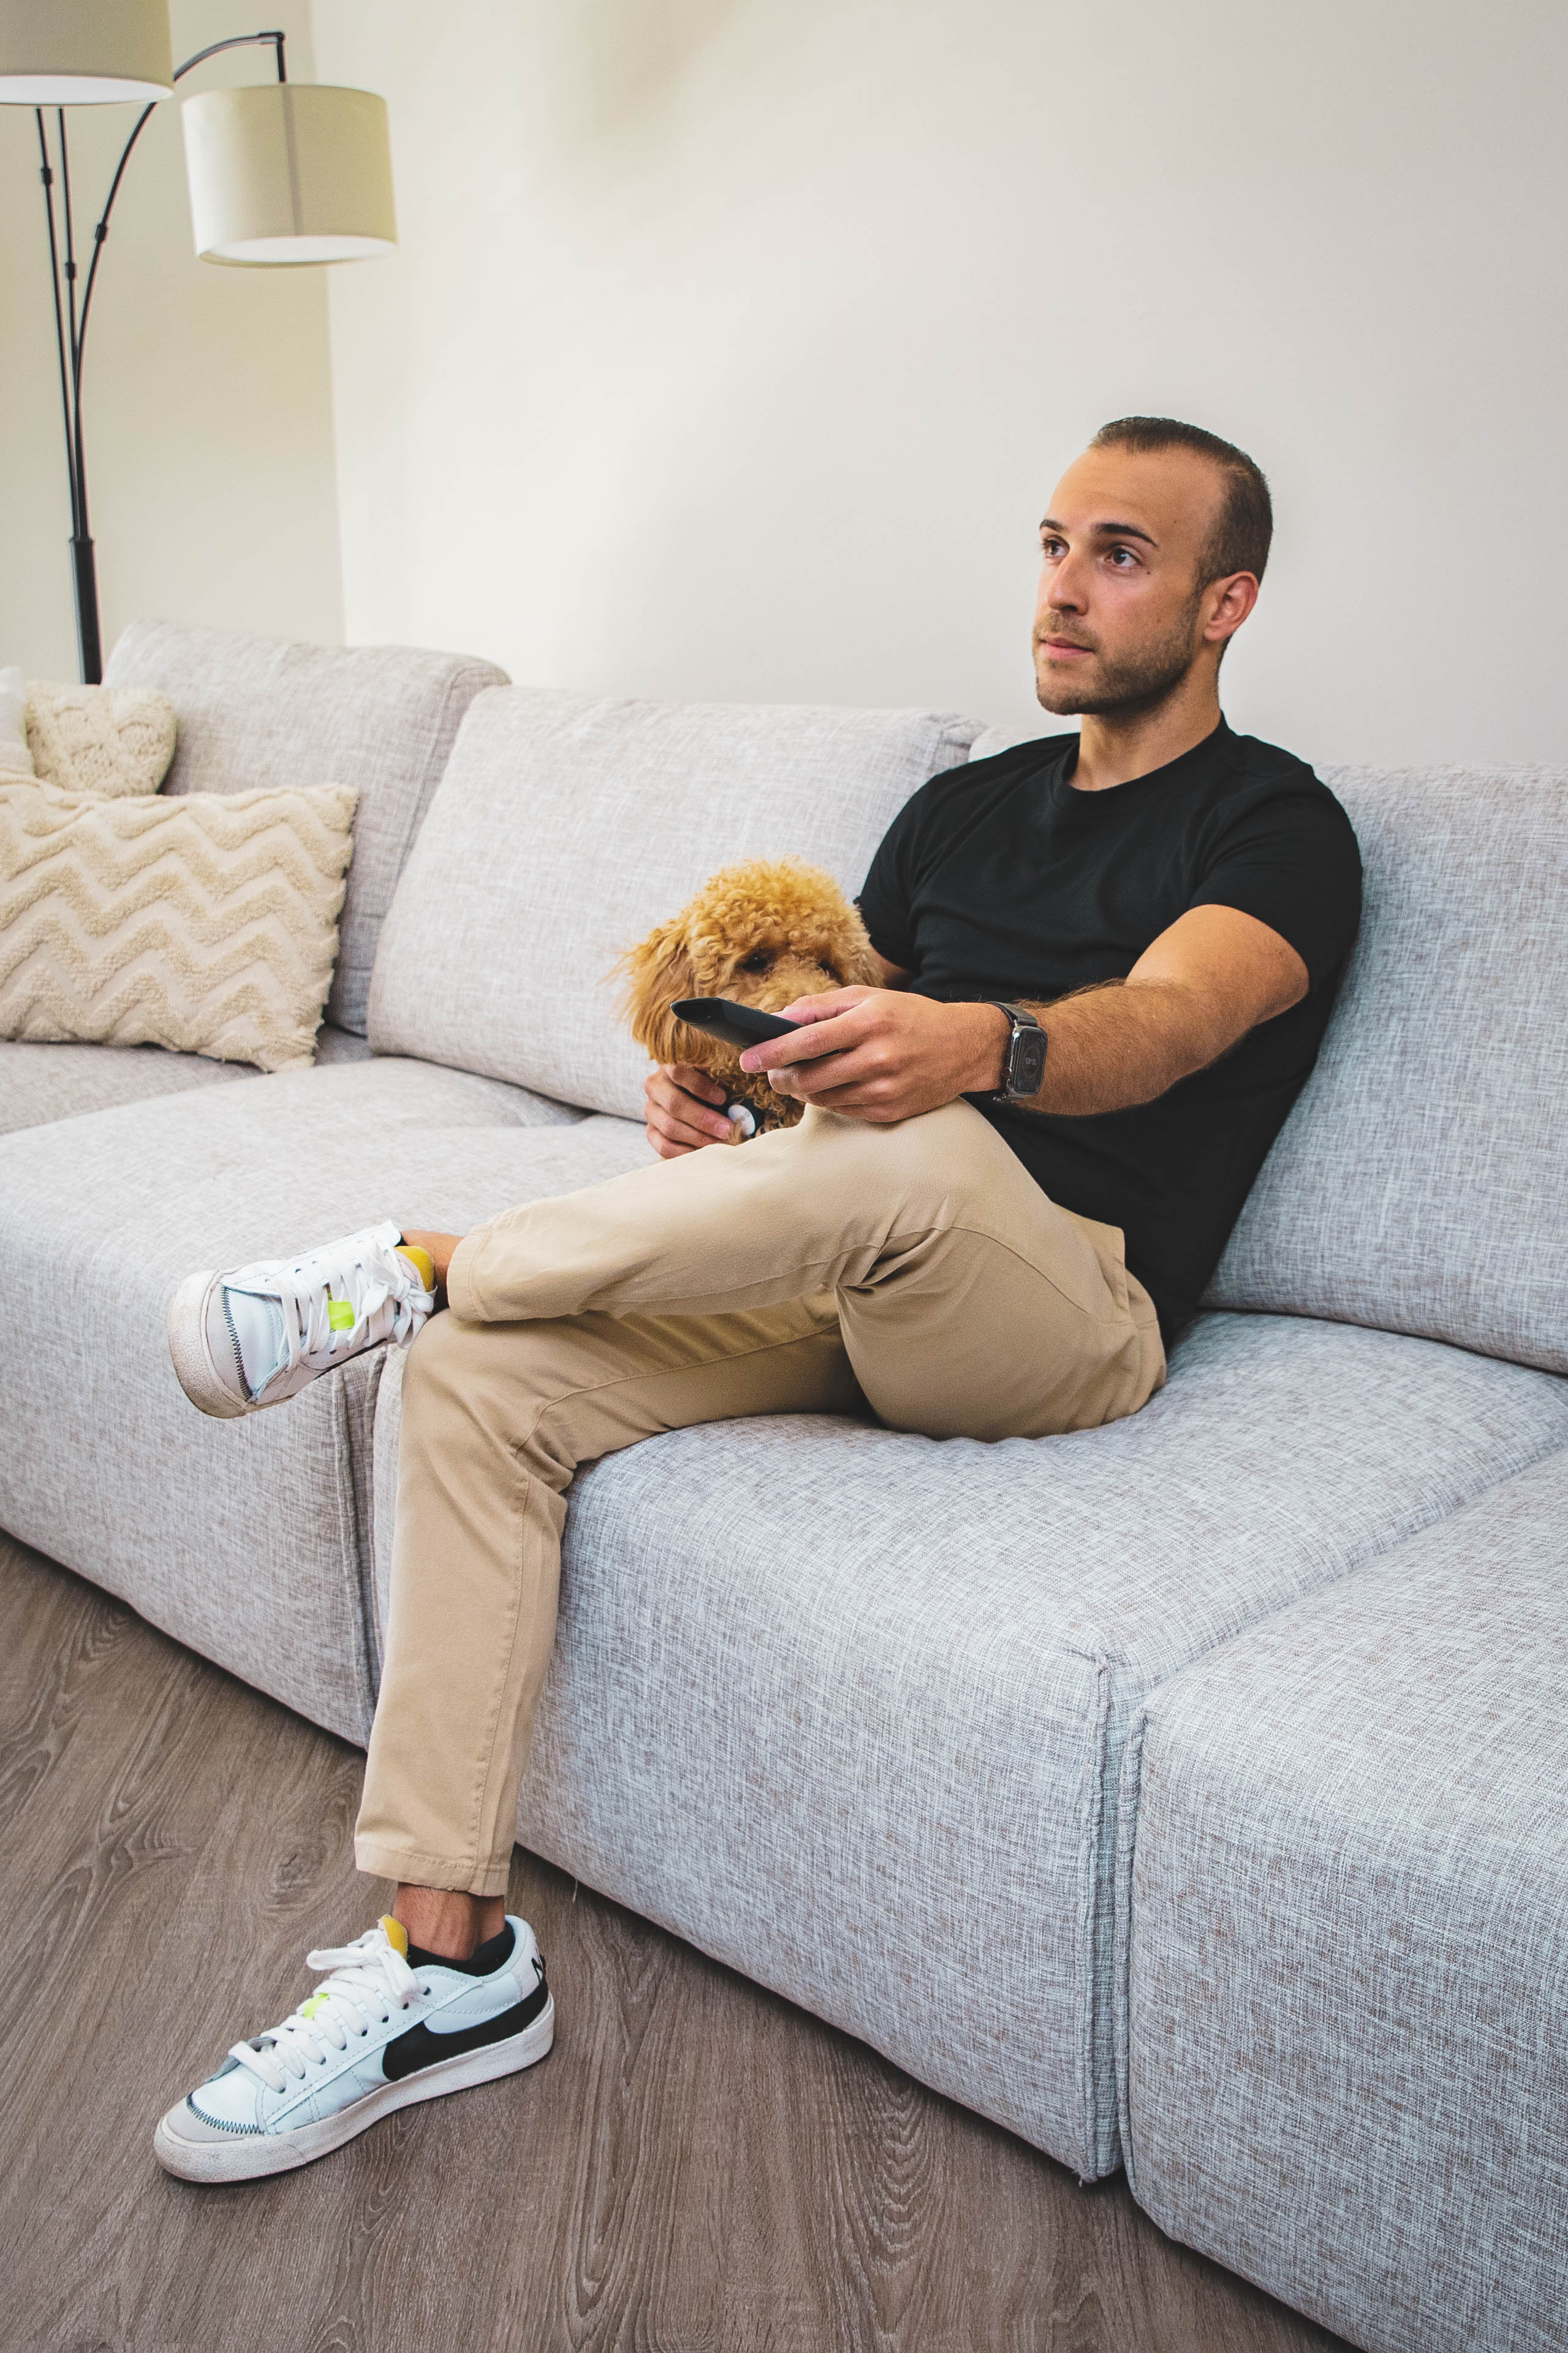 A person wearing beige pants and white sneakers, sitting on a light gray sofa, holding a small dog and looking to the side.